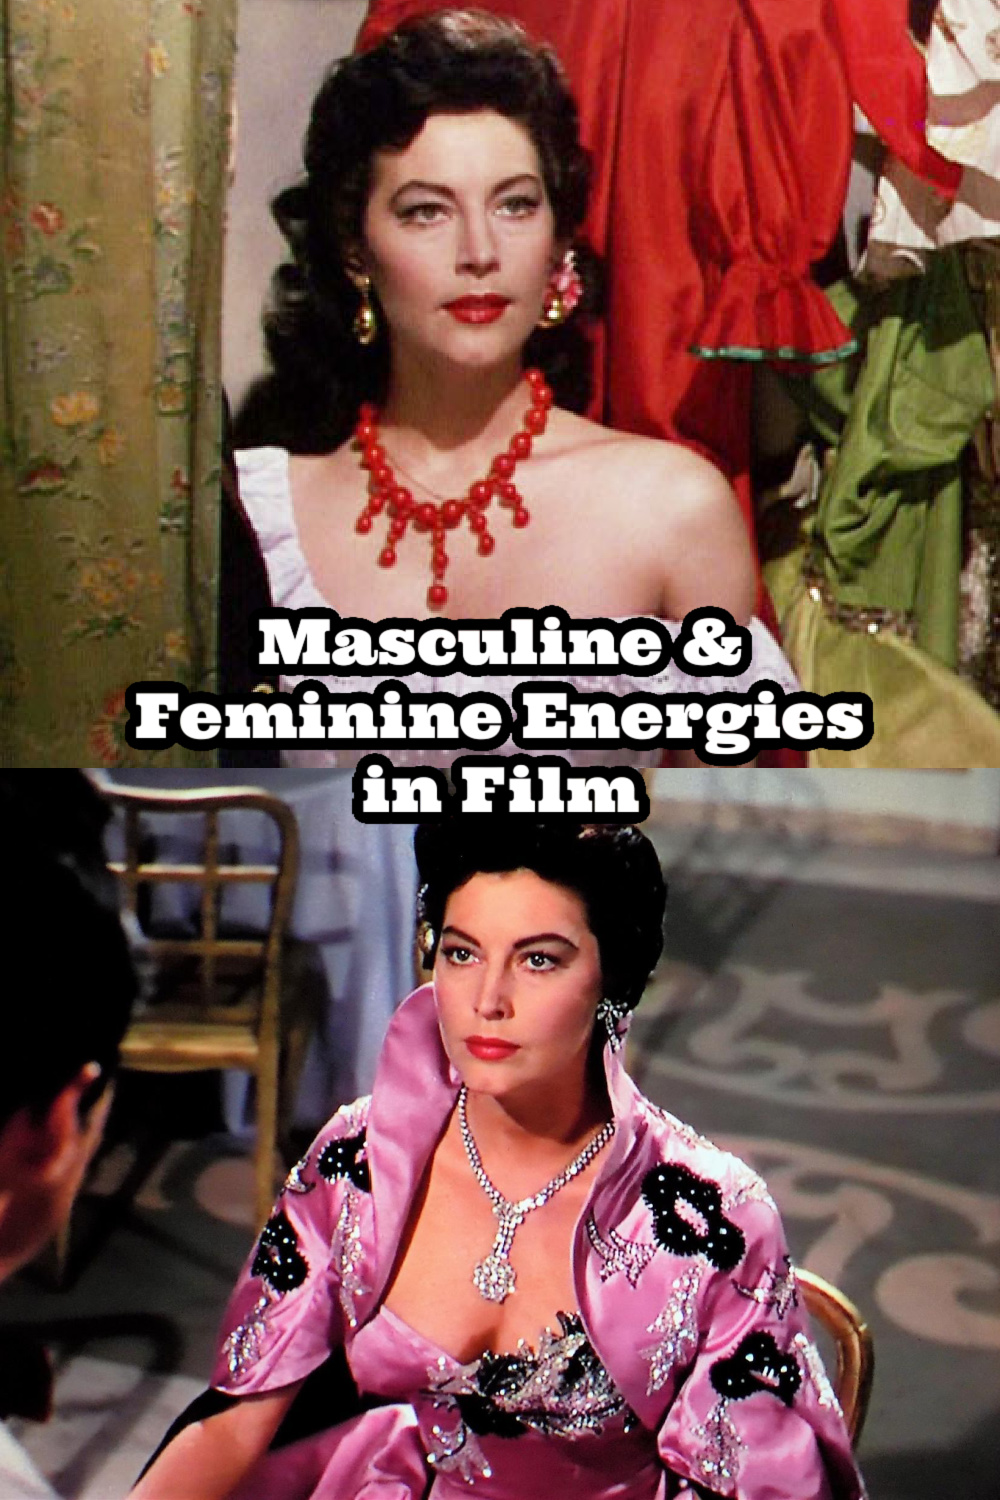 masculine energy shield in women, the barefoot contessa ava gardner, wounded masculine energy in a female, sexual polarity in relationships, sexual polarity, sexual polarity masculine feminine, law of polarity in relationships, how to create polarity in relationships, wounded masculine energy in a woman, understanding masculine and feminine energy, understanding masculine and feminine energy beginners guide, feminine and masculine energy in relationships, difference between feminine and masculine energy, divine masculine and feminine healing energy, feminine energy, feminine and masculine energy balance, feminine and masculine energy traits, feminine masculine energy, feminine energy vs masculine energy, masculine energy, masculine energy vs feminine energy, masculine vs feminine, Everyday starlet, sarah blodgett,